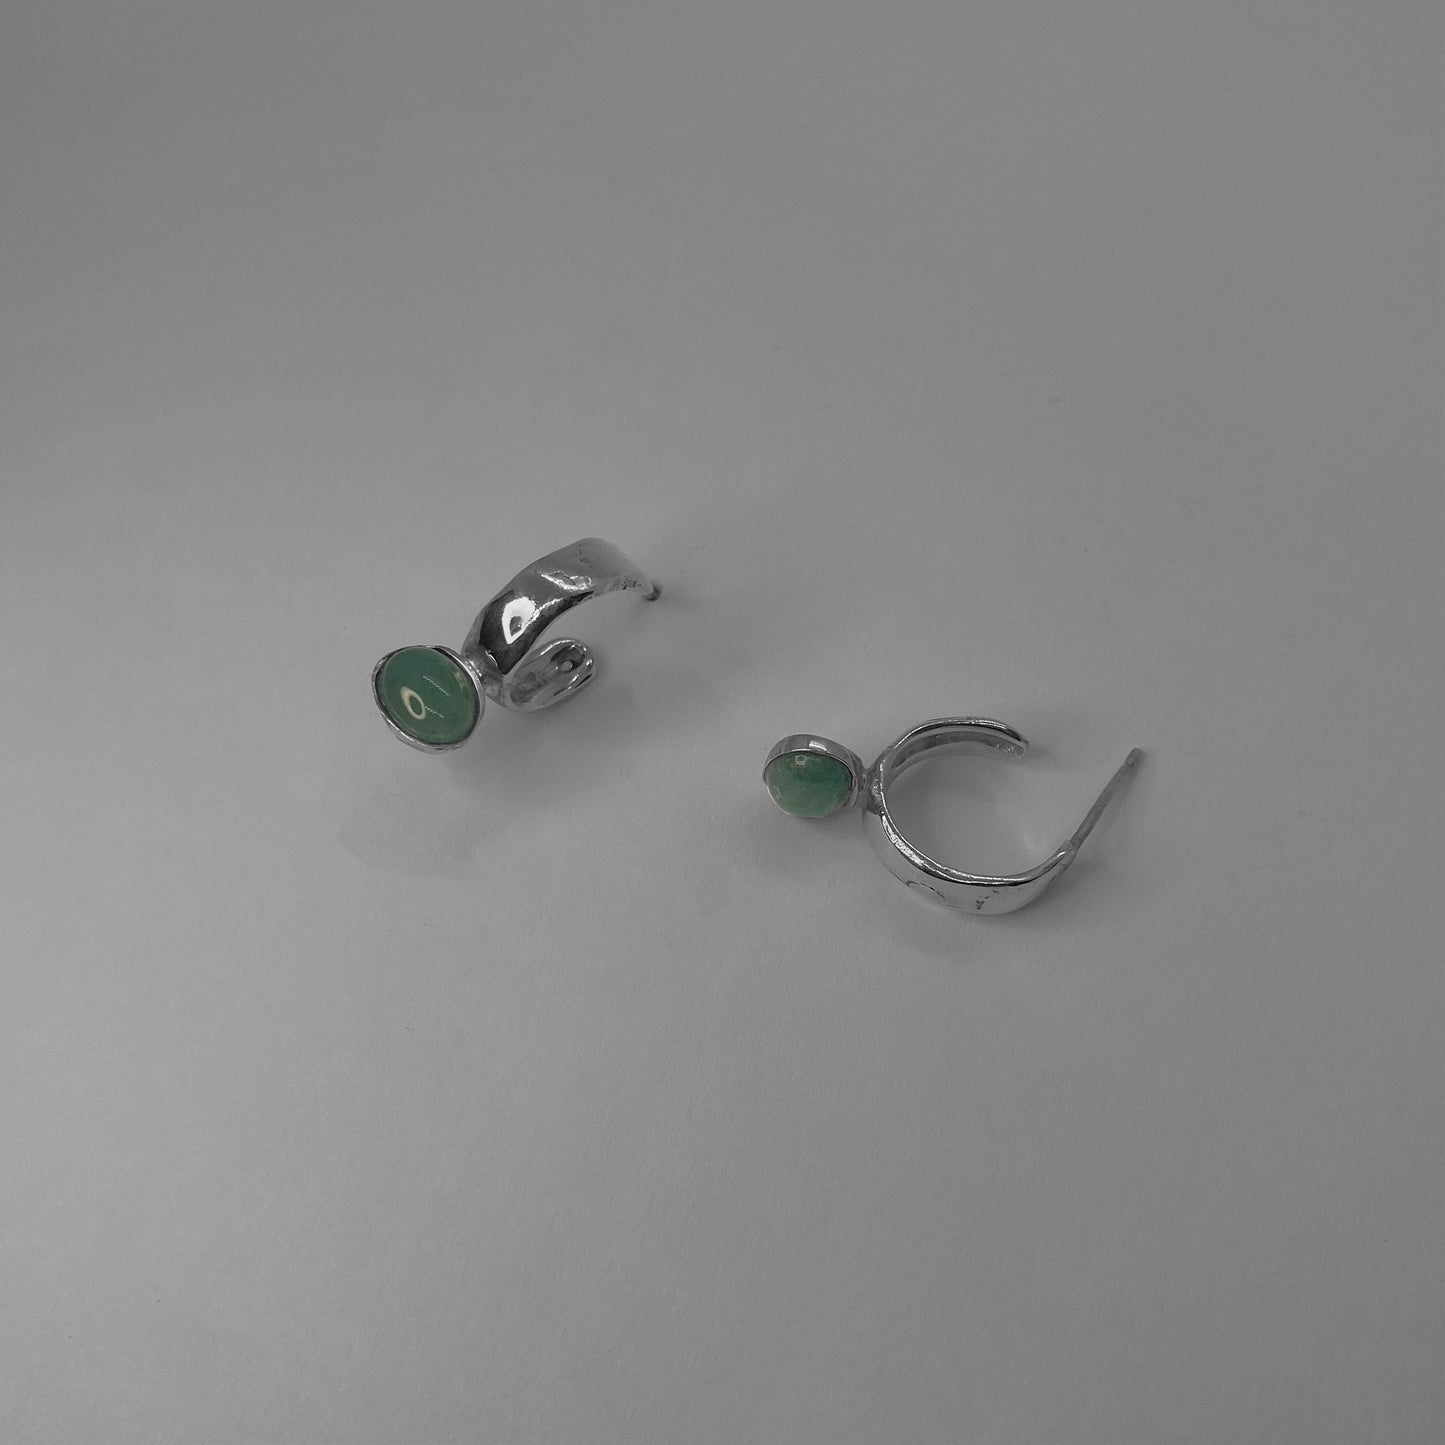 The small circle earrings are handmade and crafted from silver 925. The accompanying stone is semiprecious and is called green agate. The earrings are smooth and glossy.